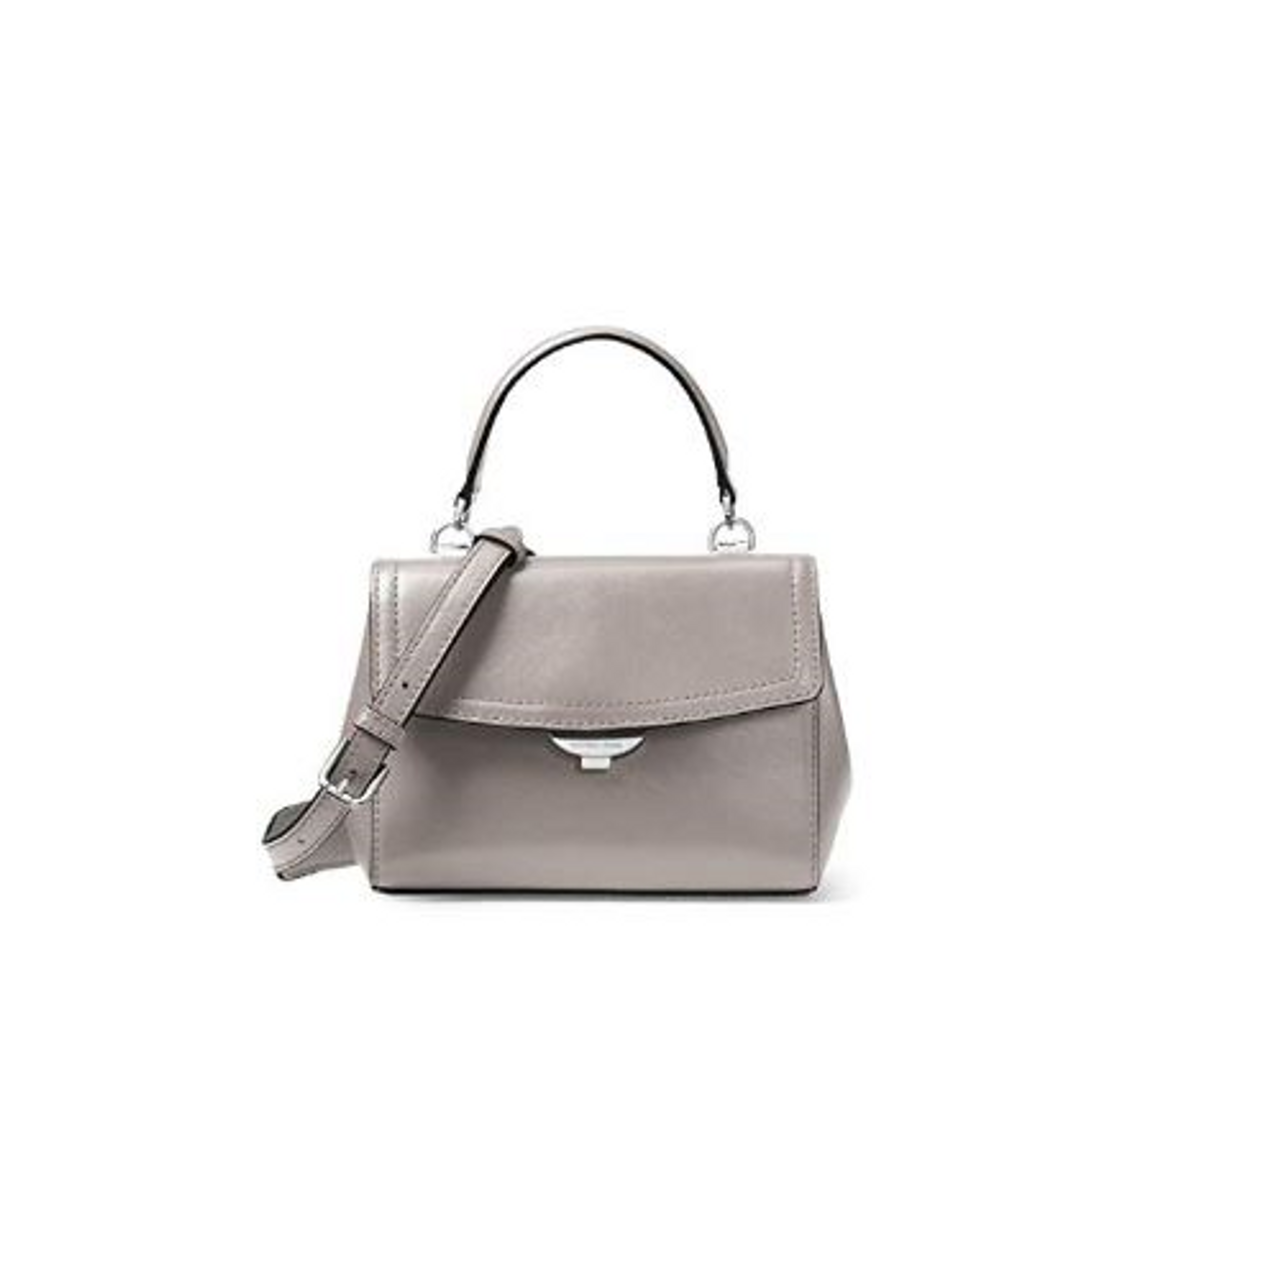 MICHAEL Michael Kors Ava Extra-small Saffiano Leather Cross-body Bag in  Gray